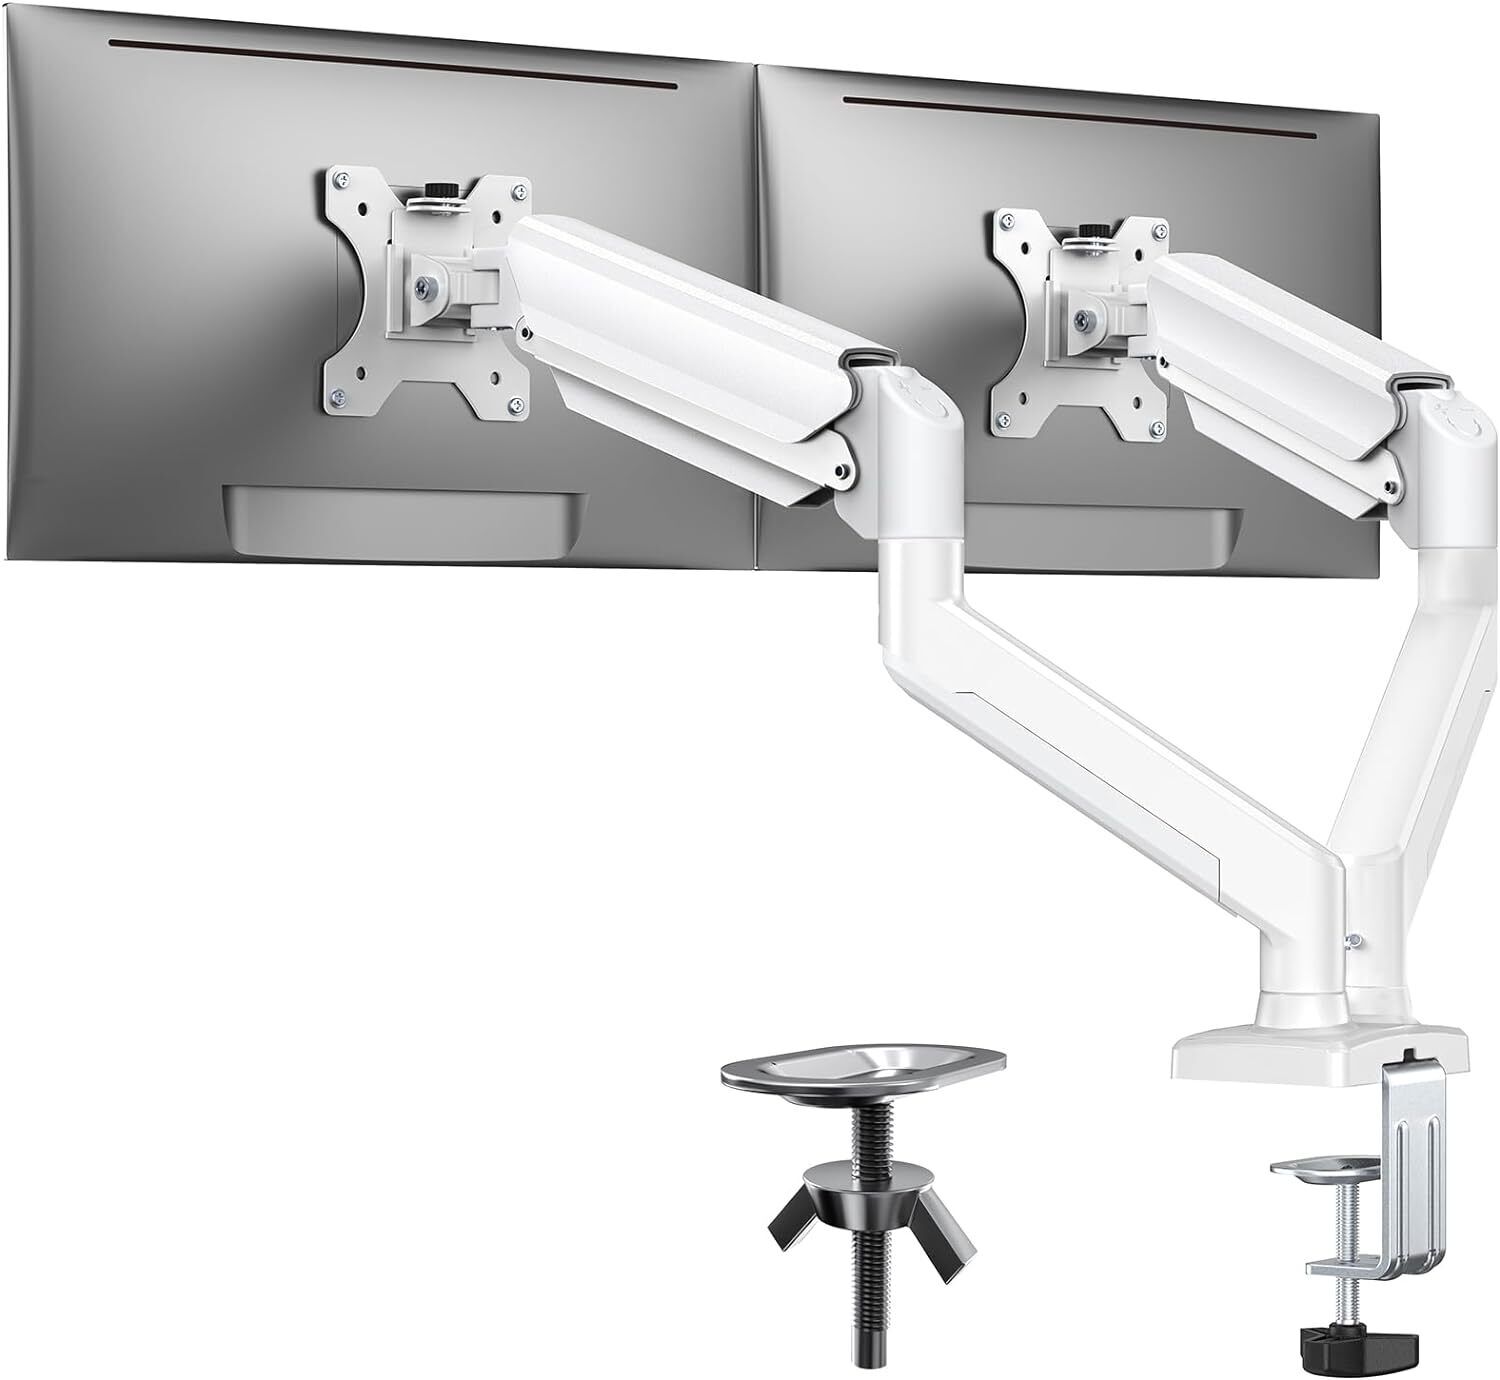 Dual Monitor Mount up to 32 inches Screen, Max 22 lbs Each Arm